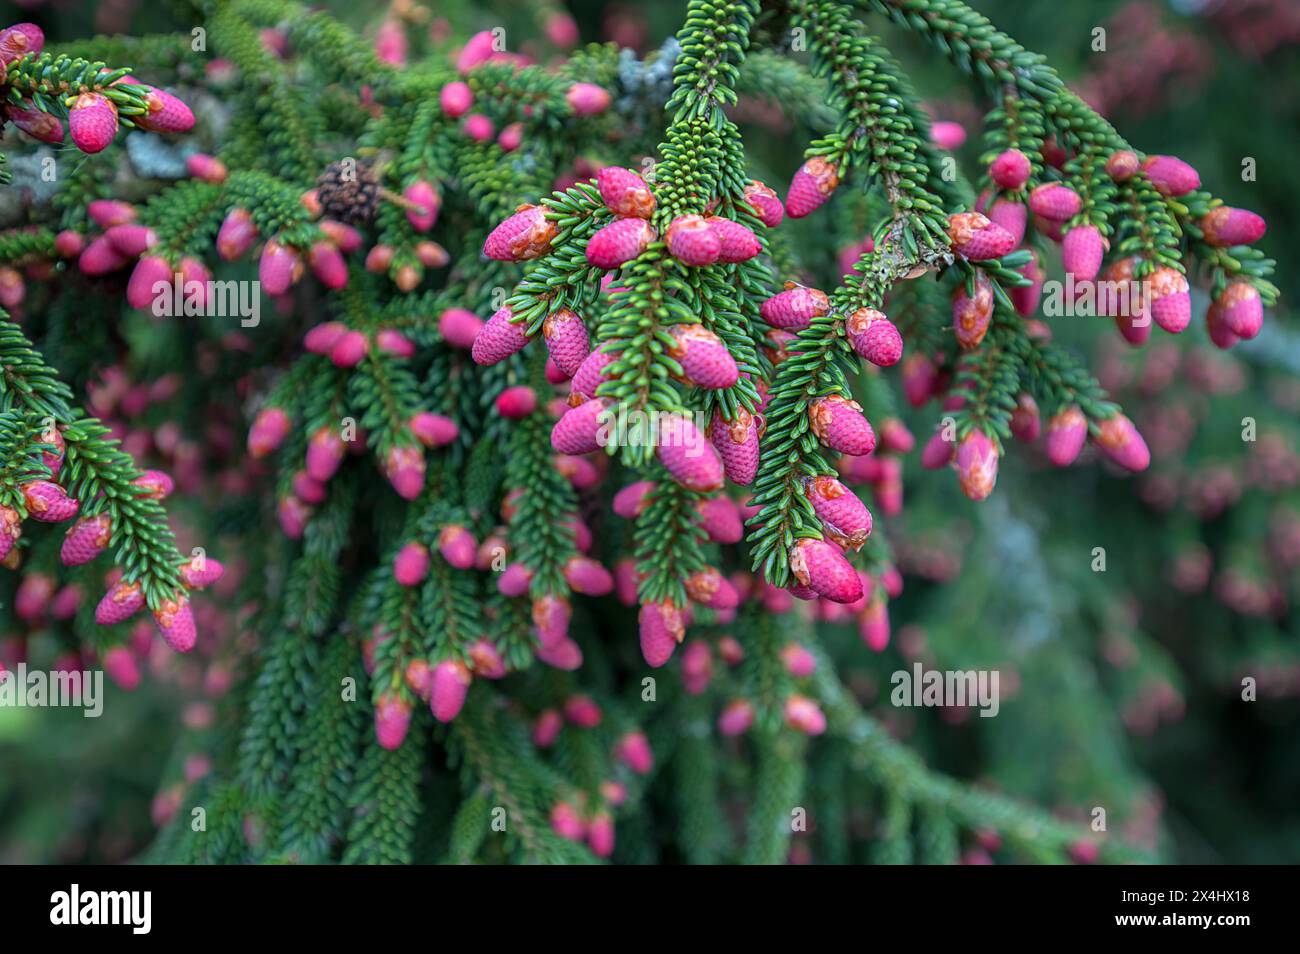 Young fruits of a Caucasian spruce (Picea orientalis), Bavaria, Germany Stock Photo